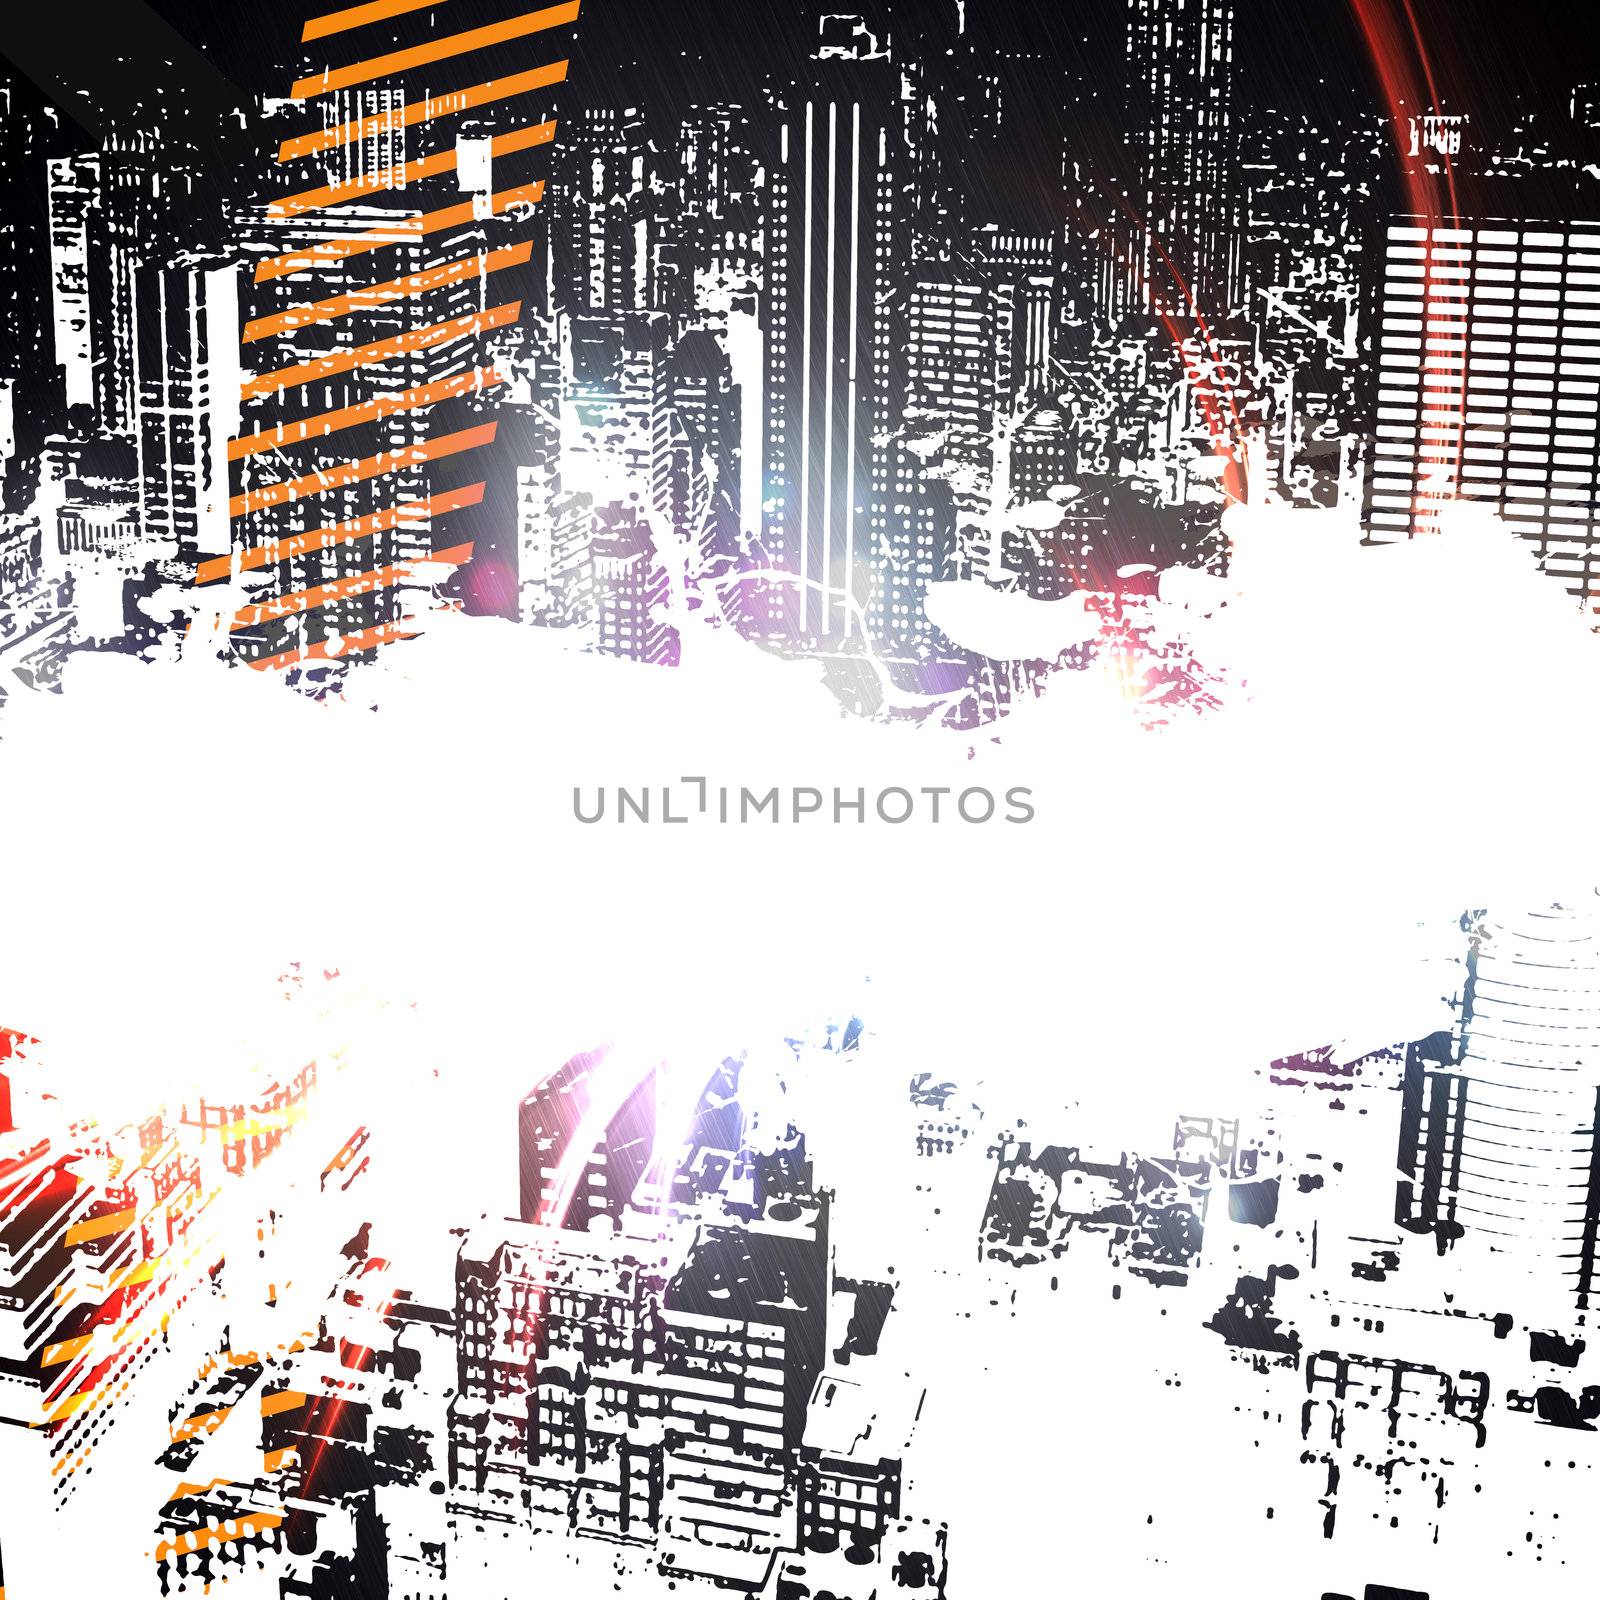 A city grunge style layout with copy space and city building silhouettes.